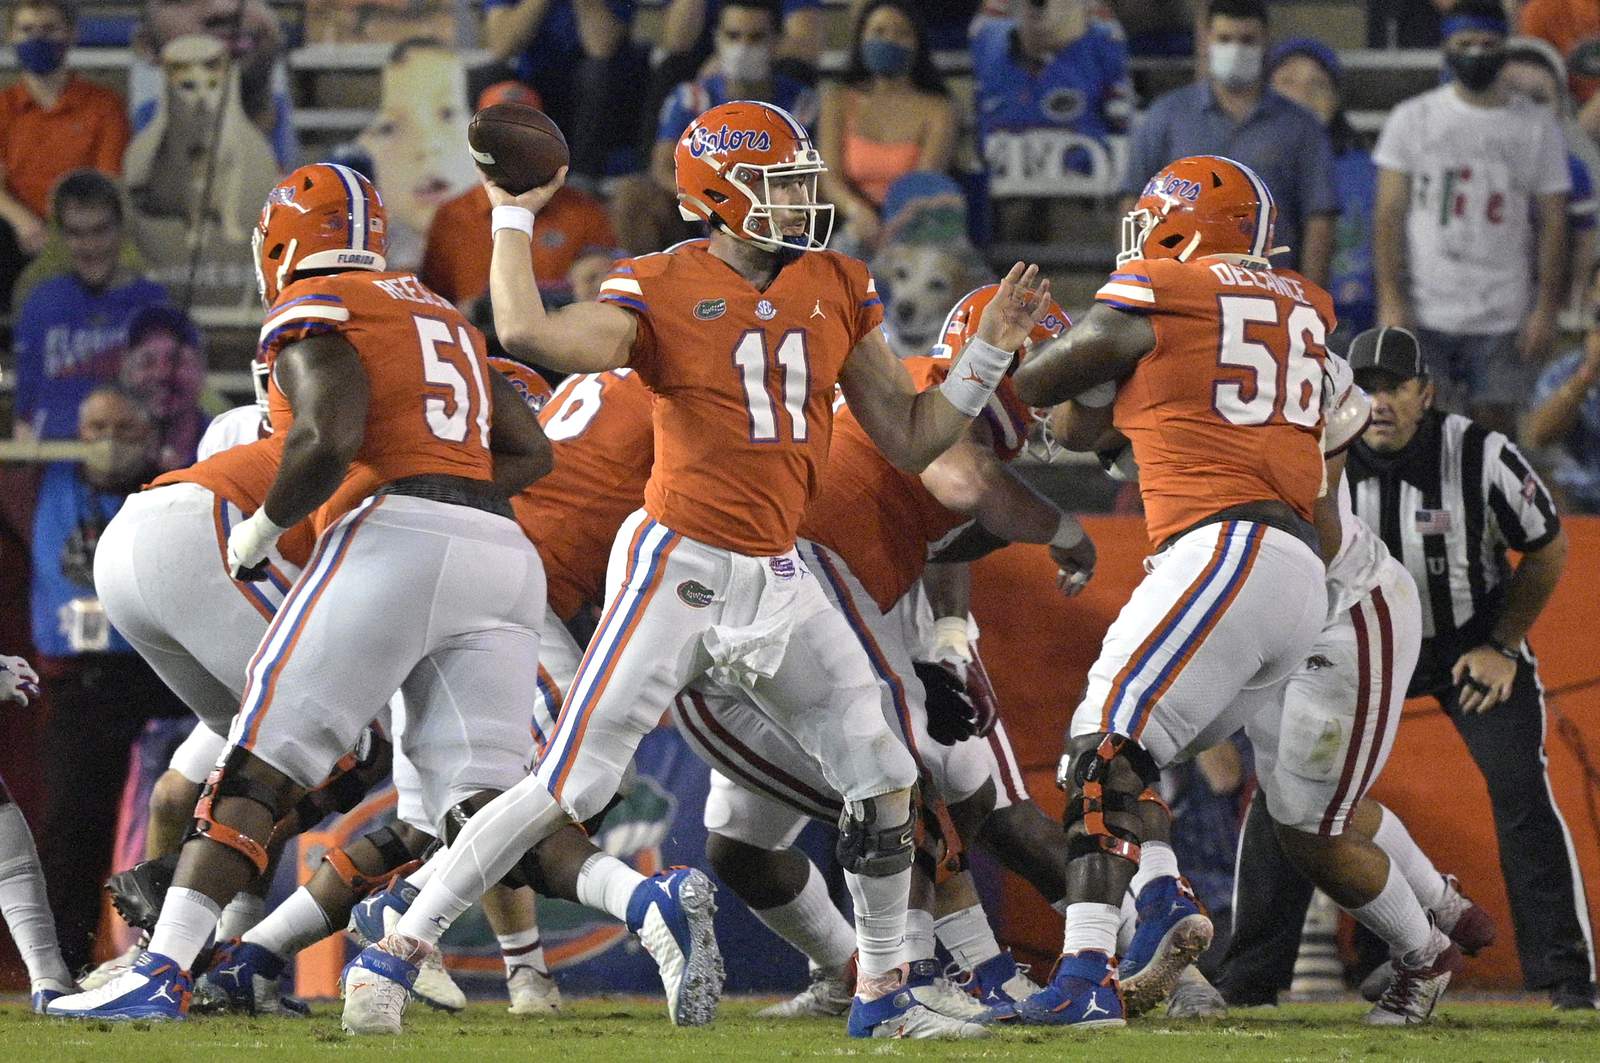 Florida quarterback Kyle Trask (11) throws a pass during the first half of an NCAA college football game, Saturday, Nov. 14, 2020, in Gainesville, Fla. (AP Photo/Phelan M. Ebenhack)